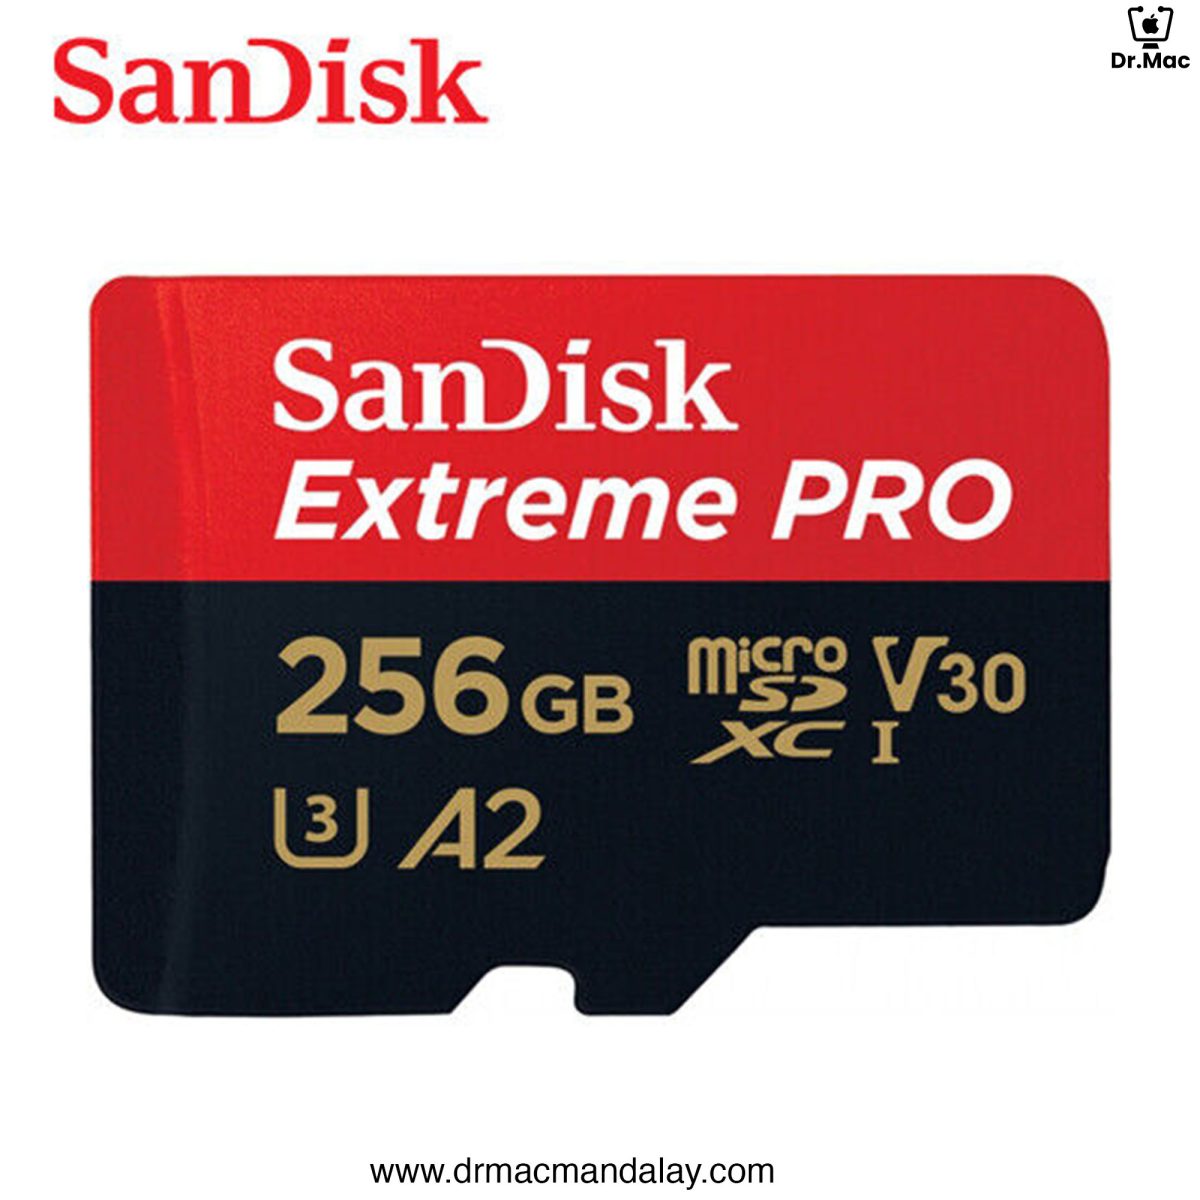 sandisk 256gb extreme pro a2 microsdxc card uhs i u3 v30 read speed up to 200mb/s for 4k uhd video